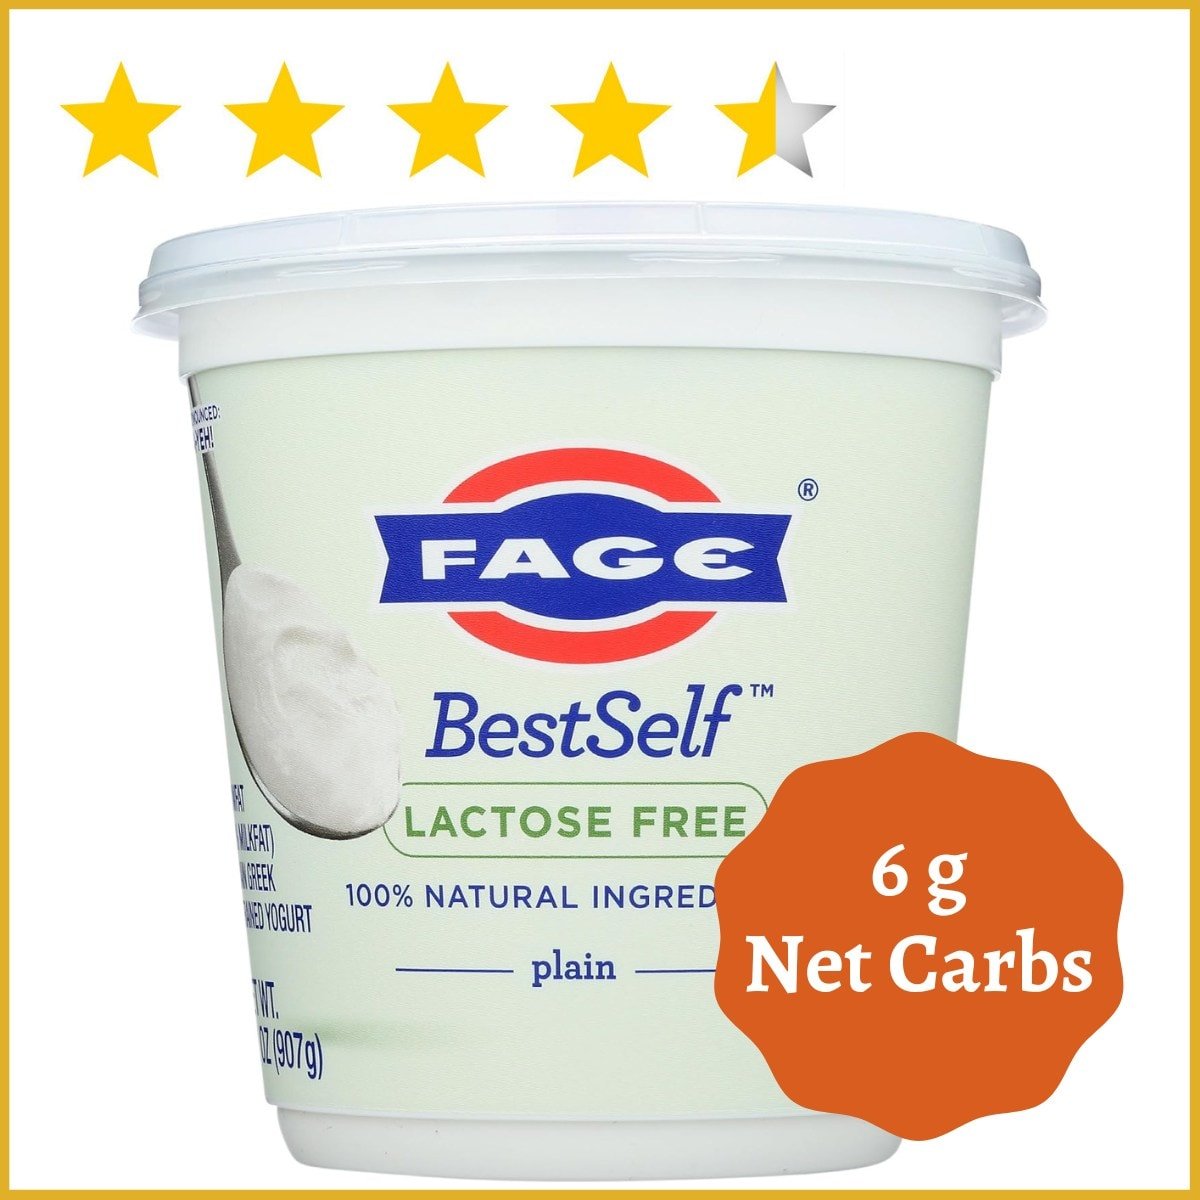 Fage Best Self Lactose-Free